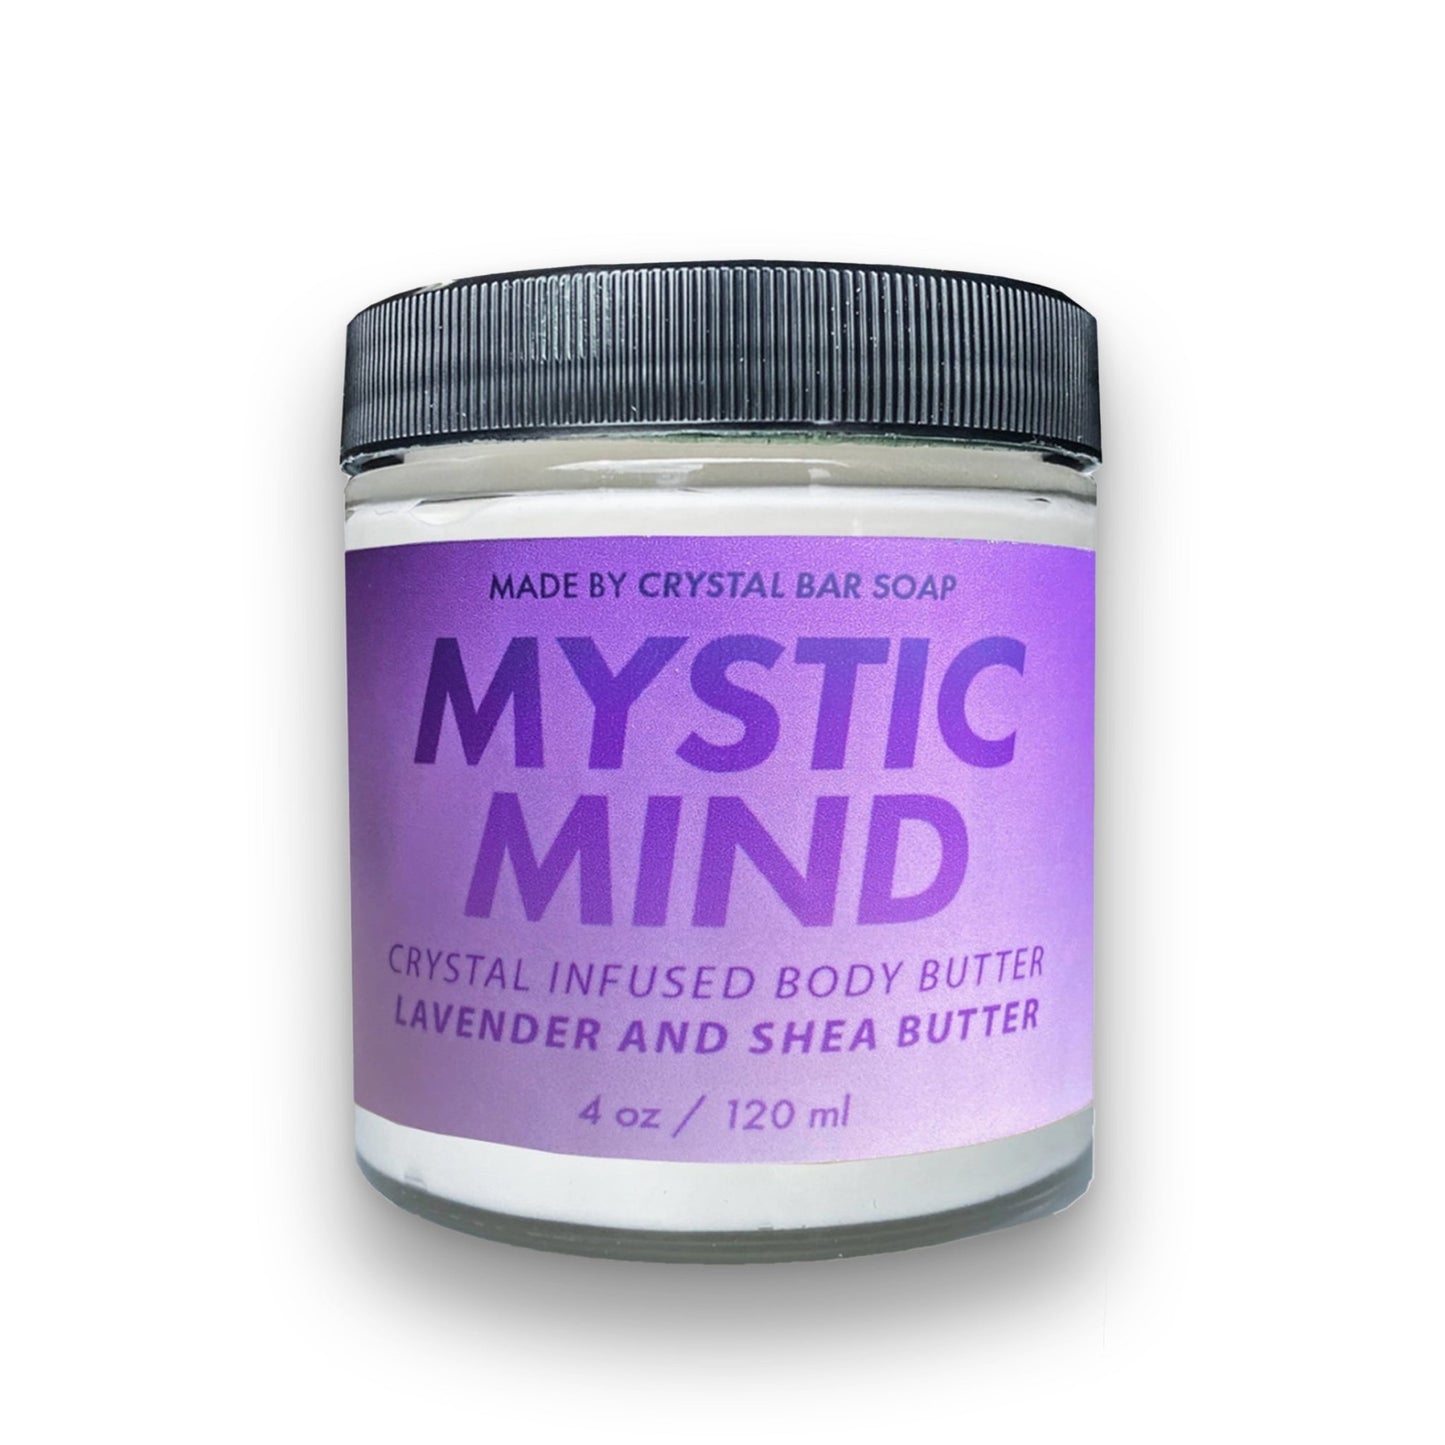 Mystic Mind - Crystal Infused Body Butter | Crystal Bar Soap - Muse + Moonstone